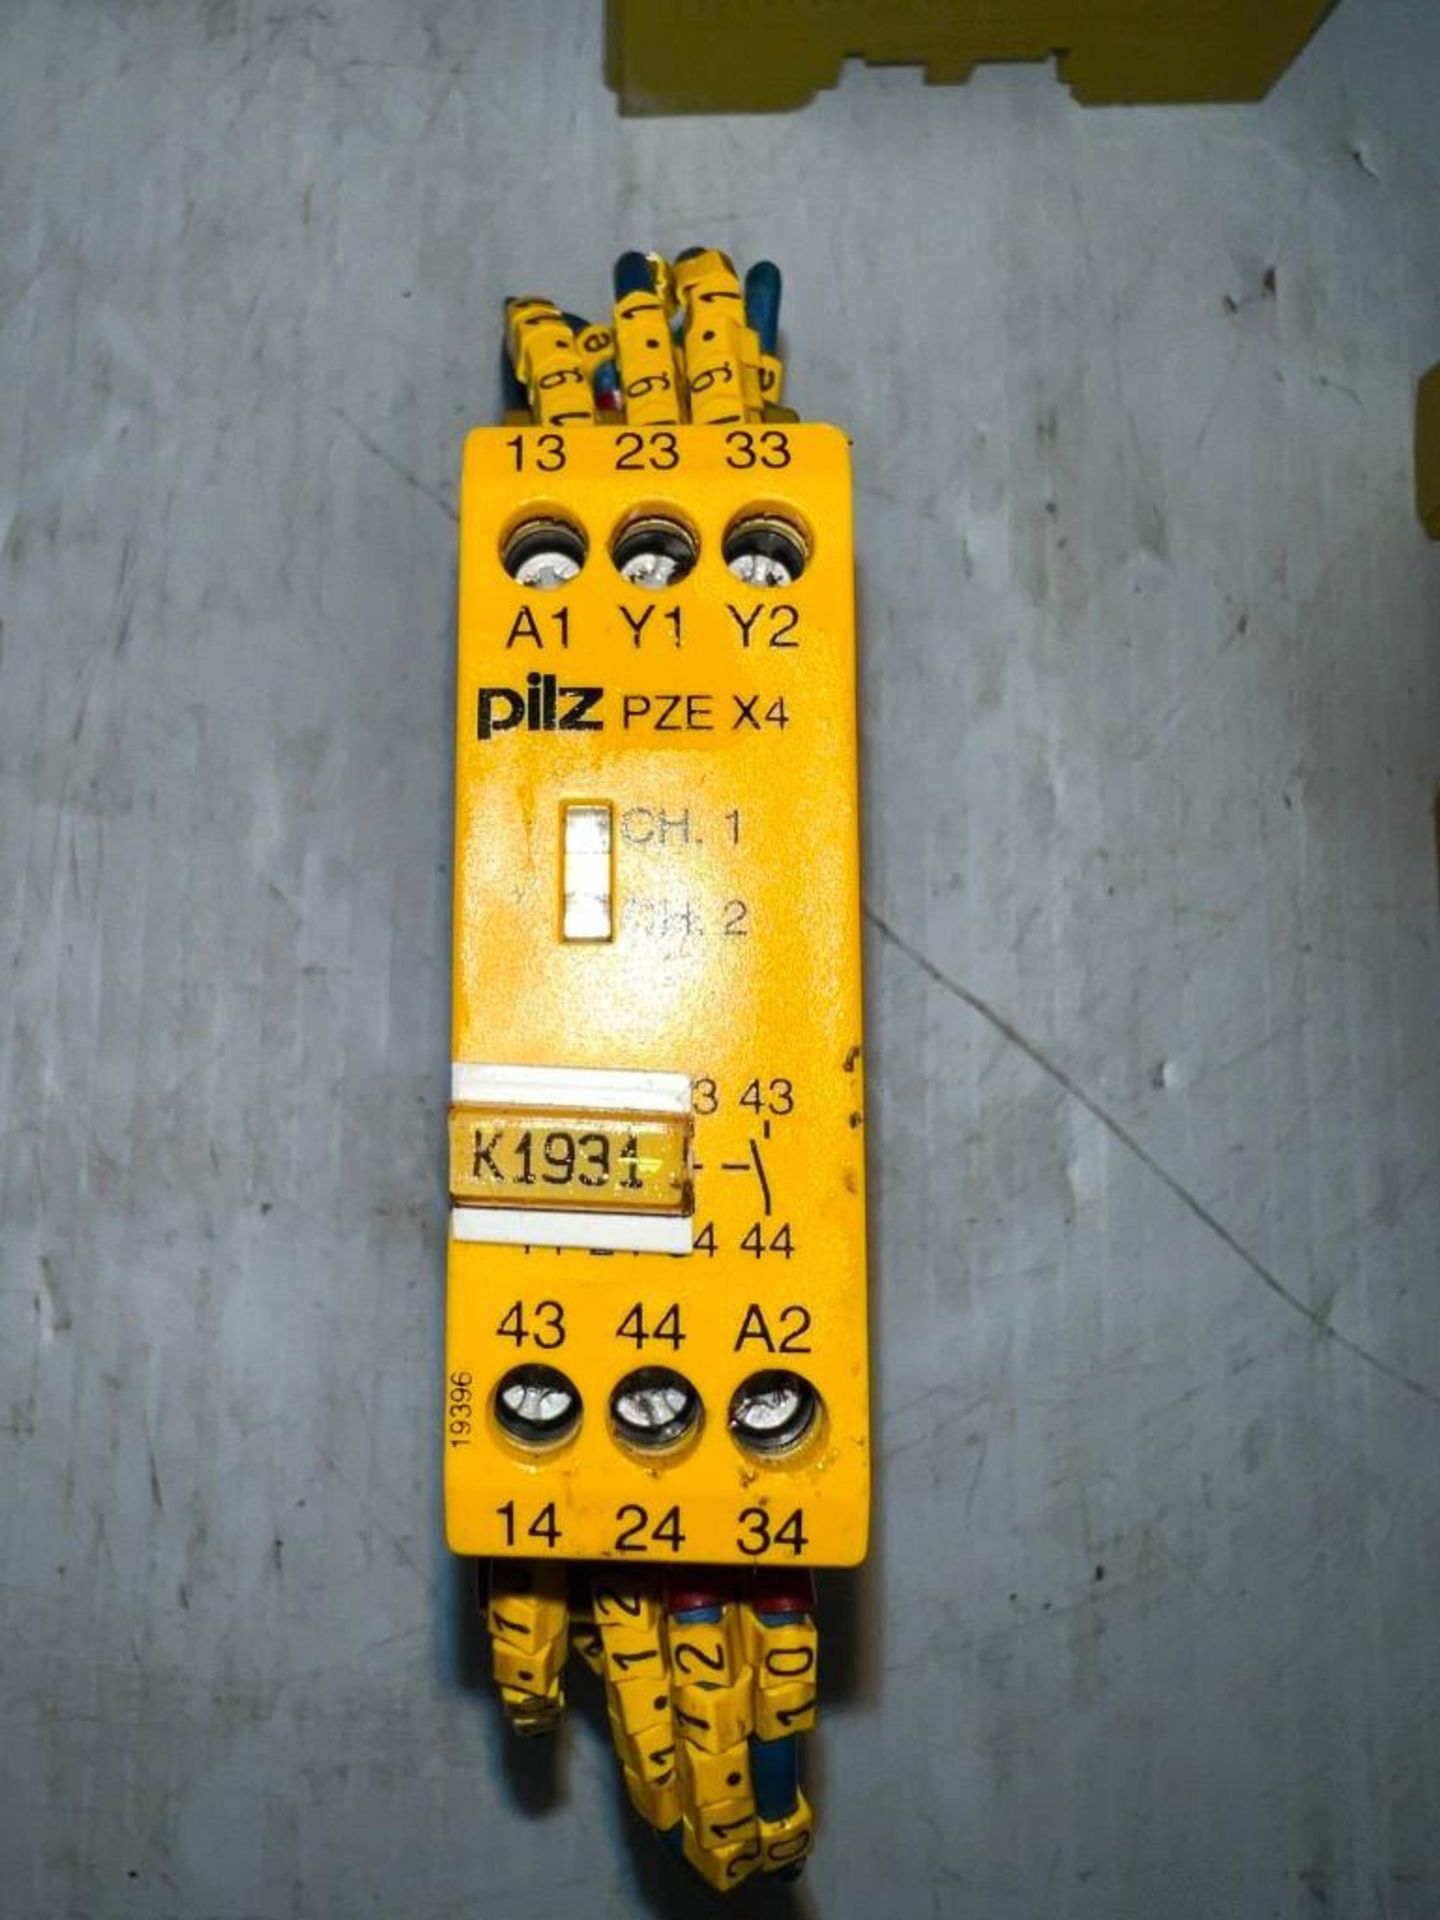 Lot of Pilz Modules (Some have a broken casing) - Image 6 of 9